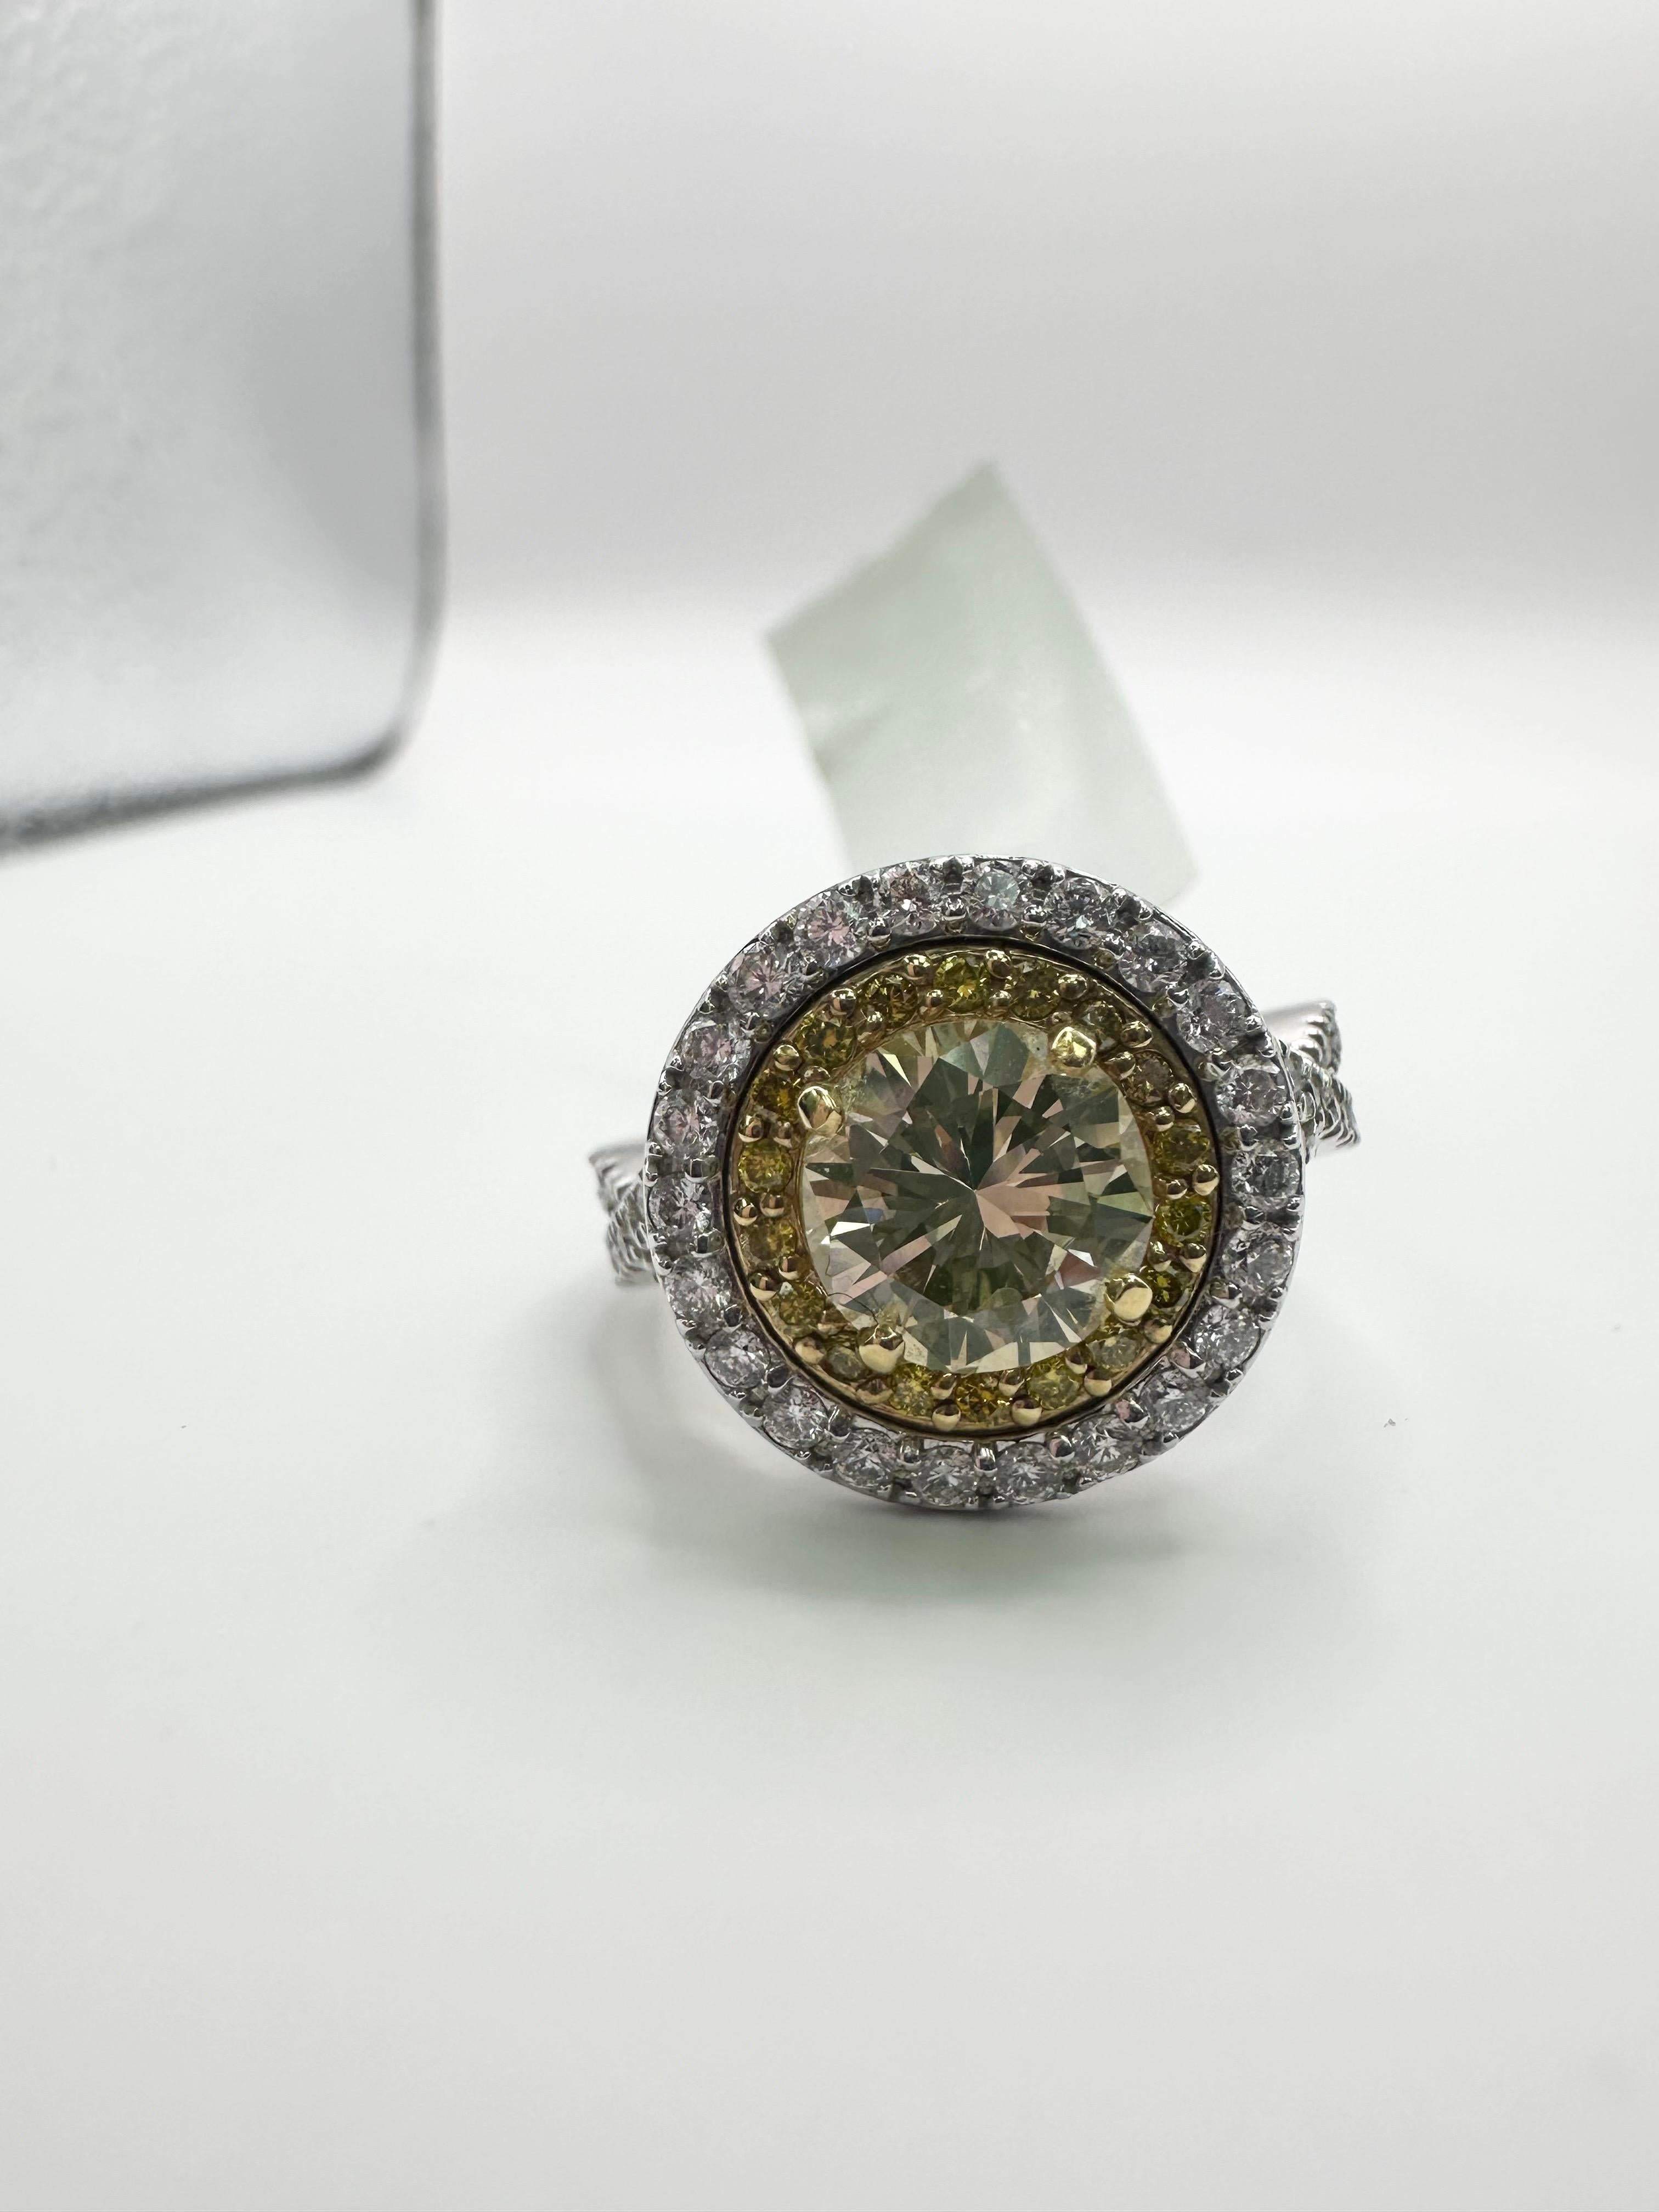 Stunning fancy yellow diamond ring in 18KT gold, the center stone is so beautiful round brilliant accompanied by a halo of yellow diamonds and another layer of white. Made with quality in mind and will last generations to come! 

1.41ct center